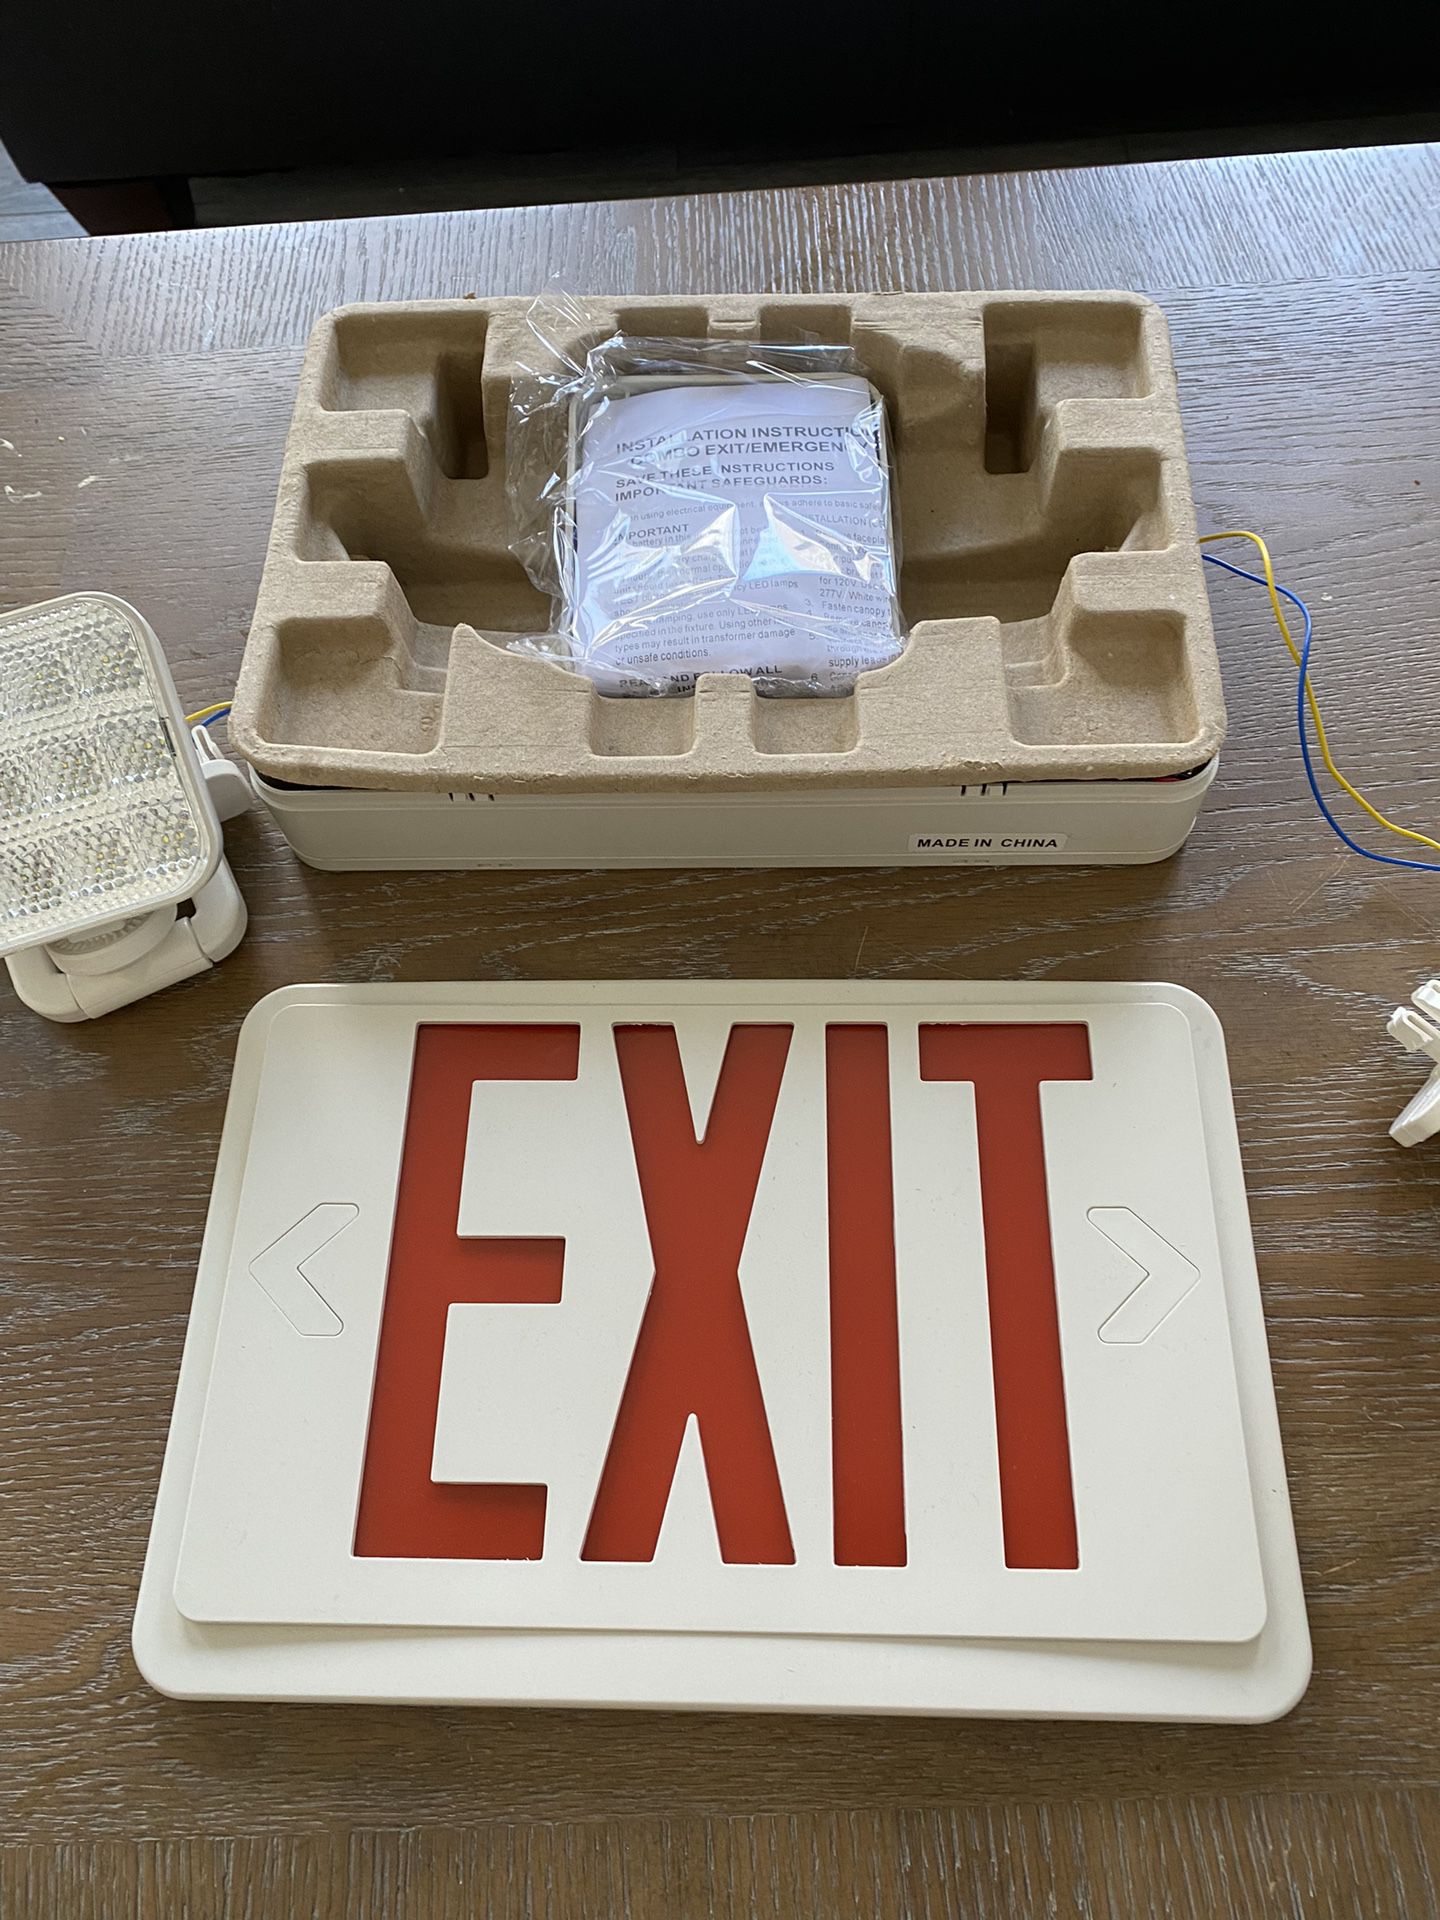 6 Total Double Sided LED Emergency EXIT Sign Two LED Flood Lights Emergency Exit Sign, Red Letters,